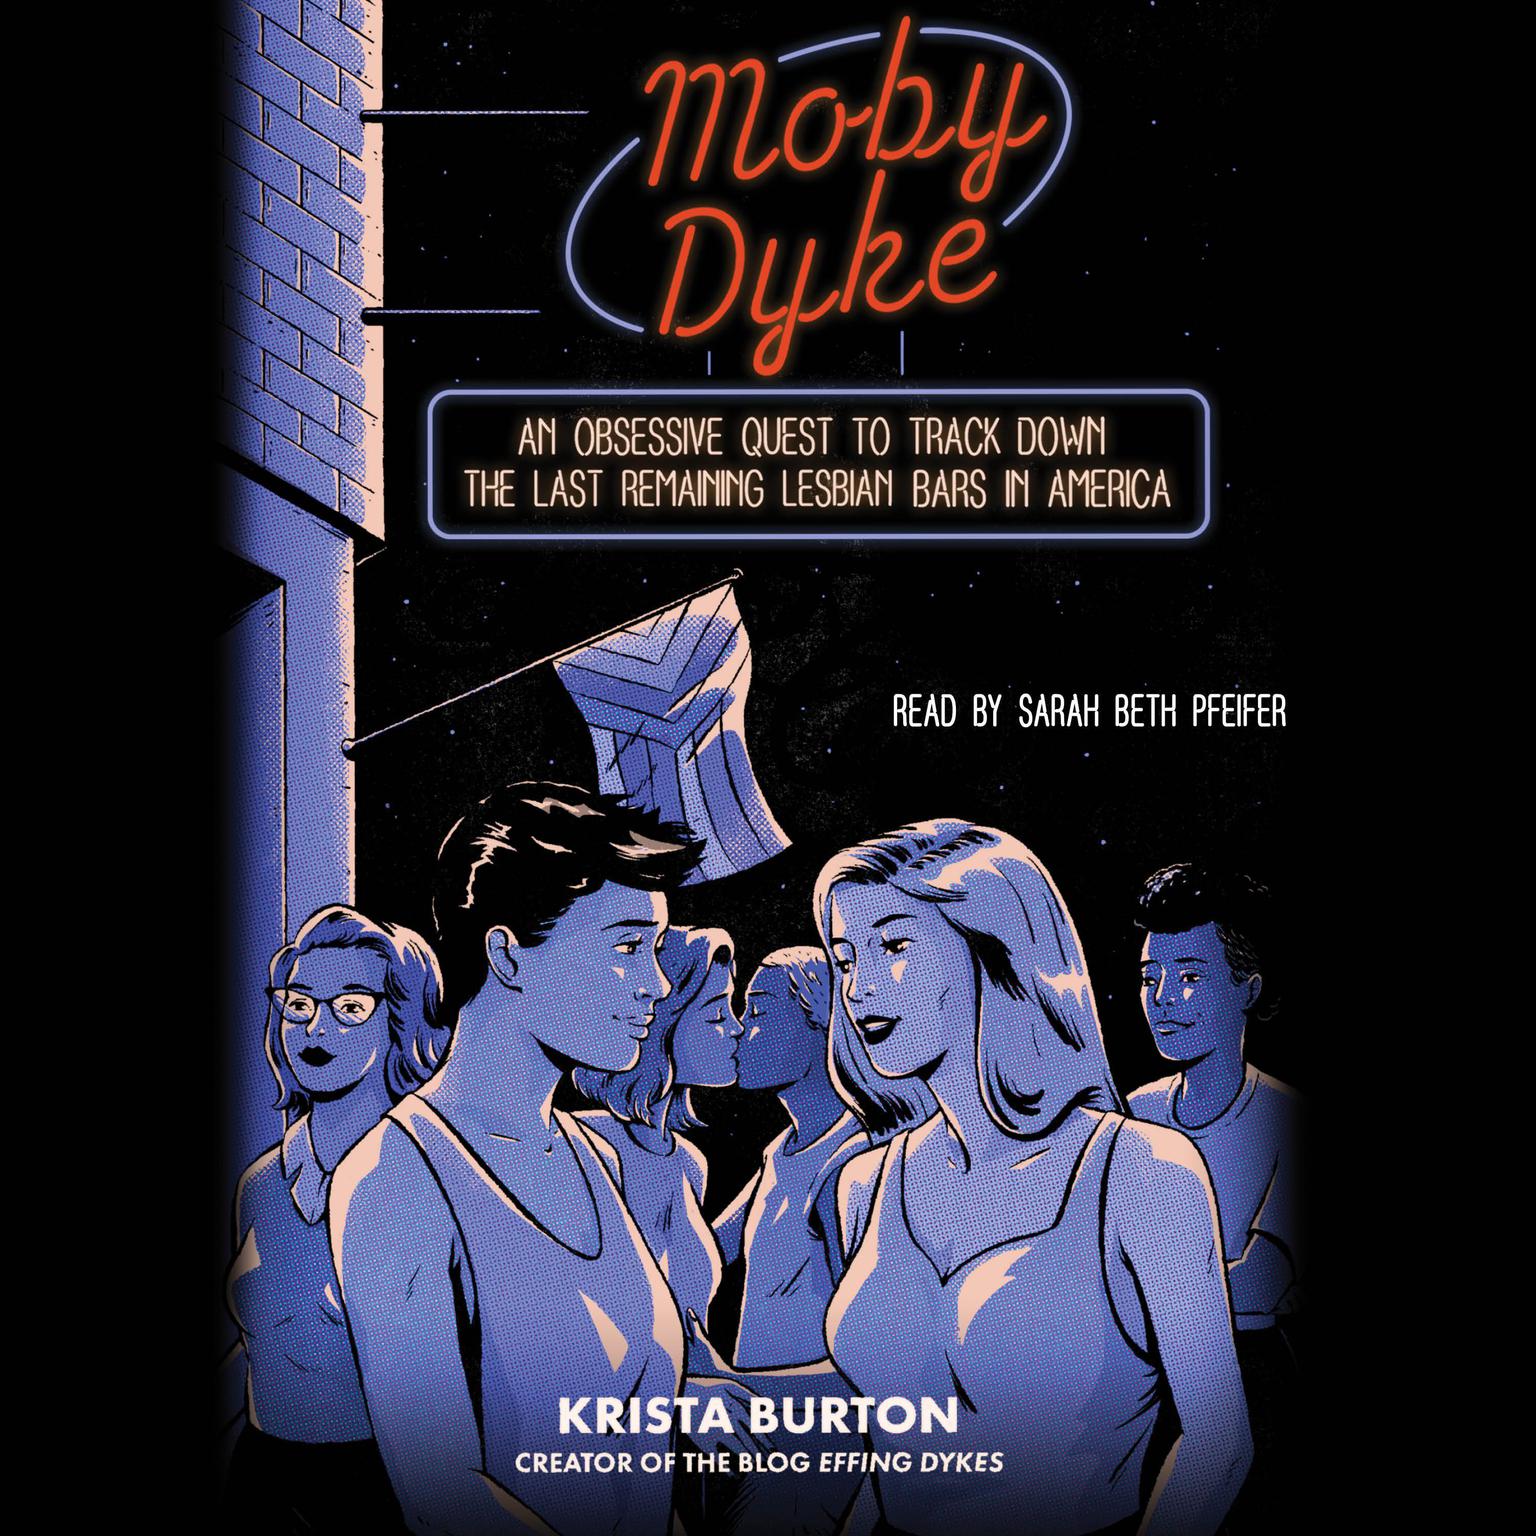 Moby Dyke: An Obsessive Quest to Track Down the Last Remaining Lesbian Bars in America Audiobook, by Krista Burton